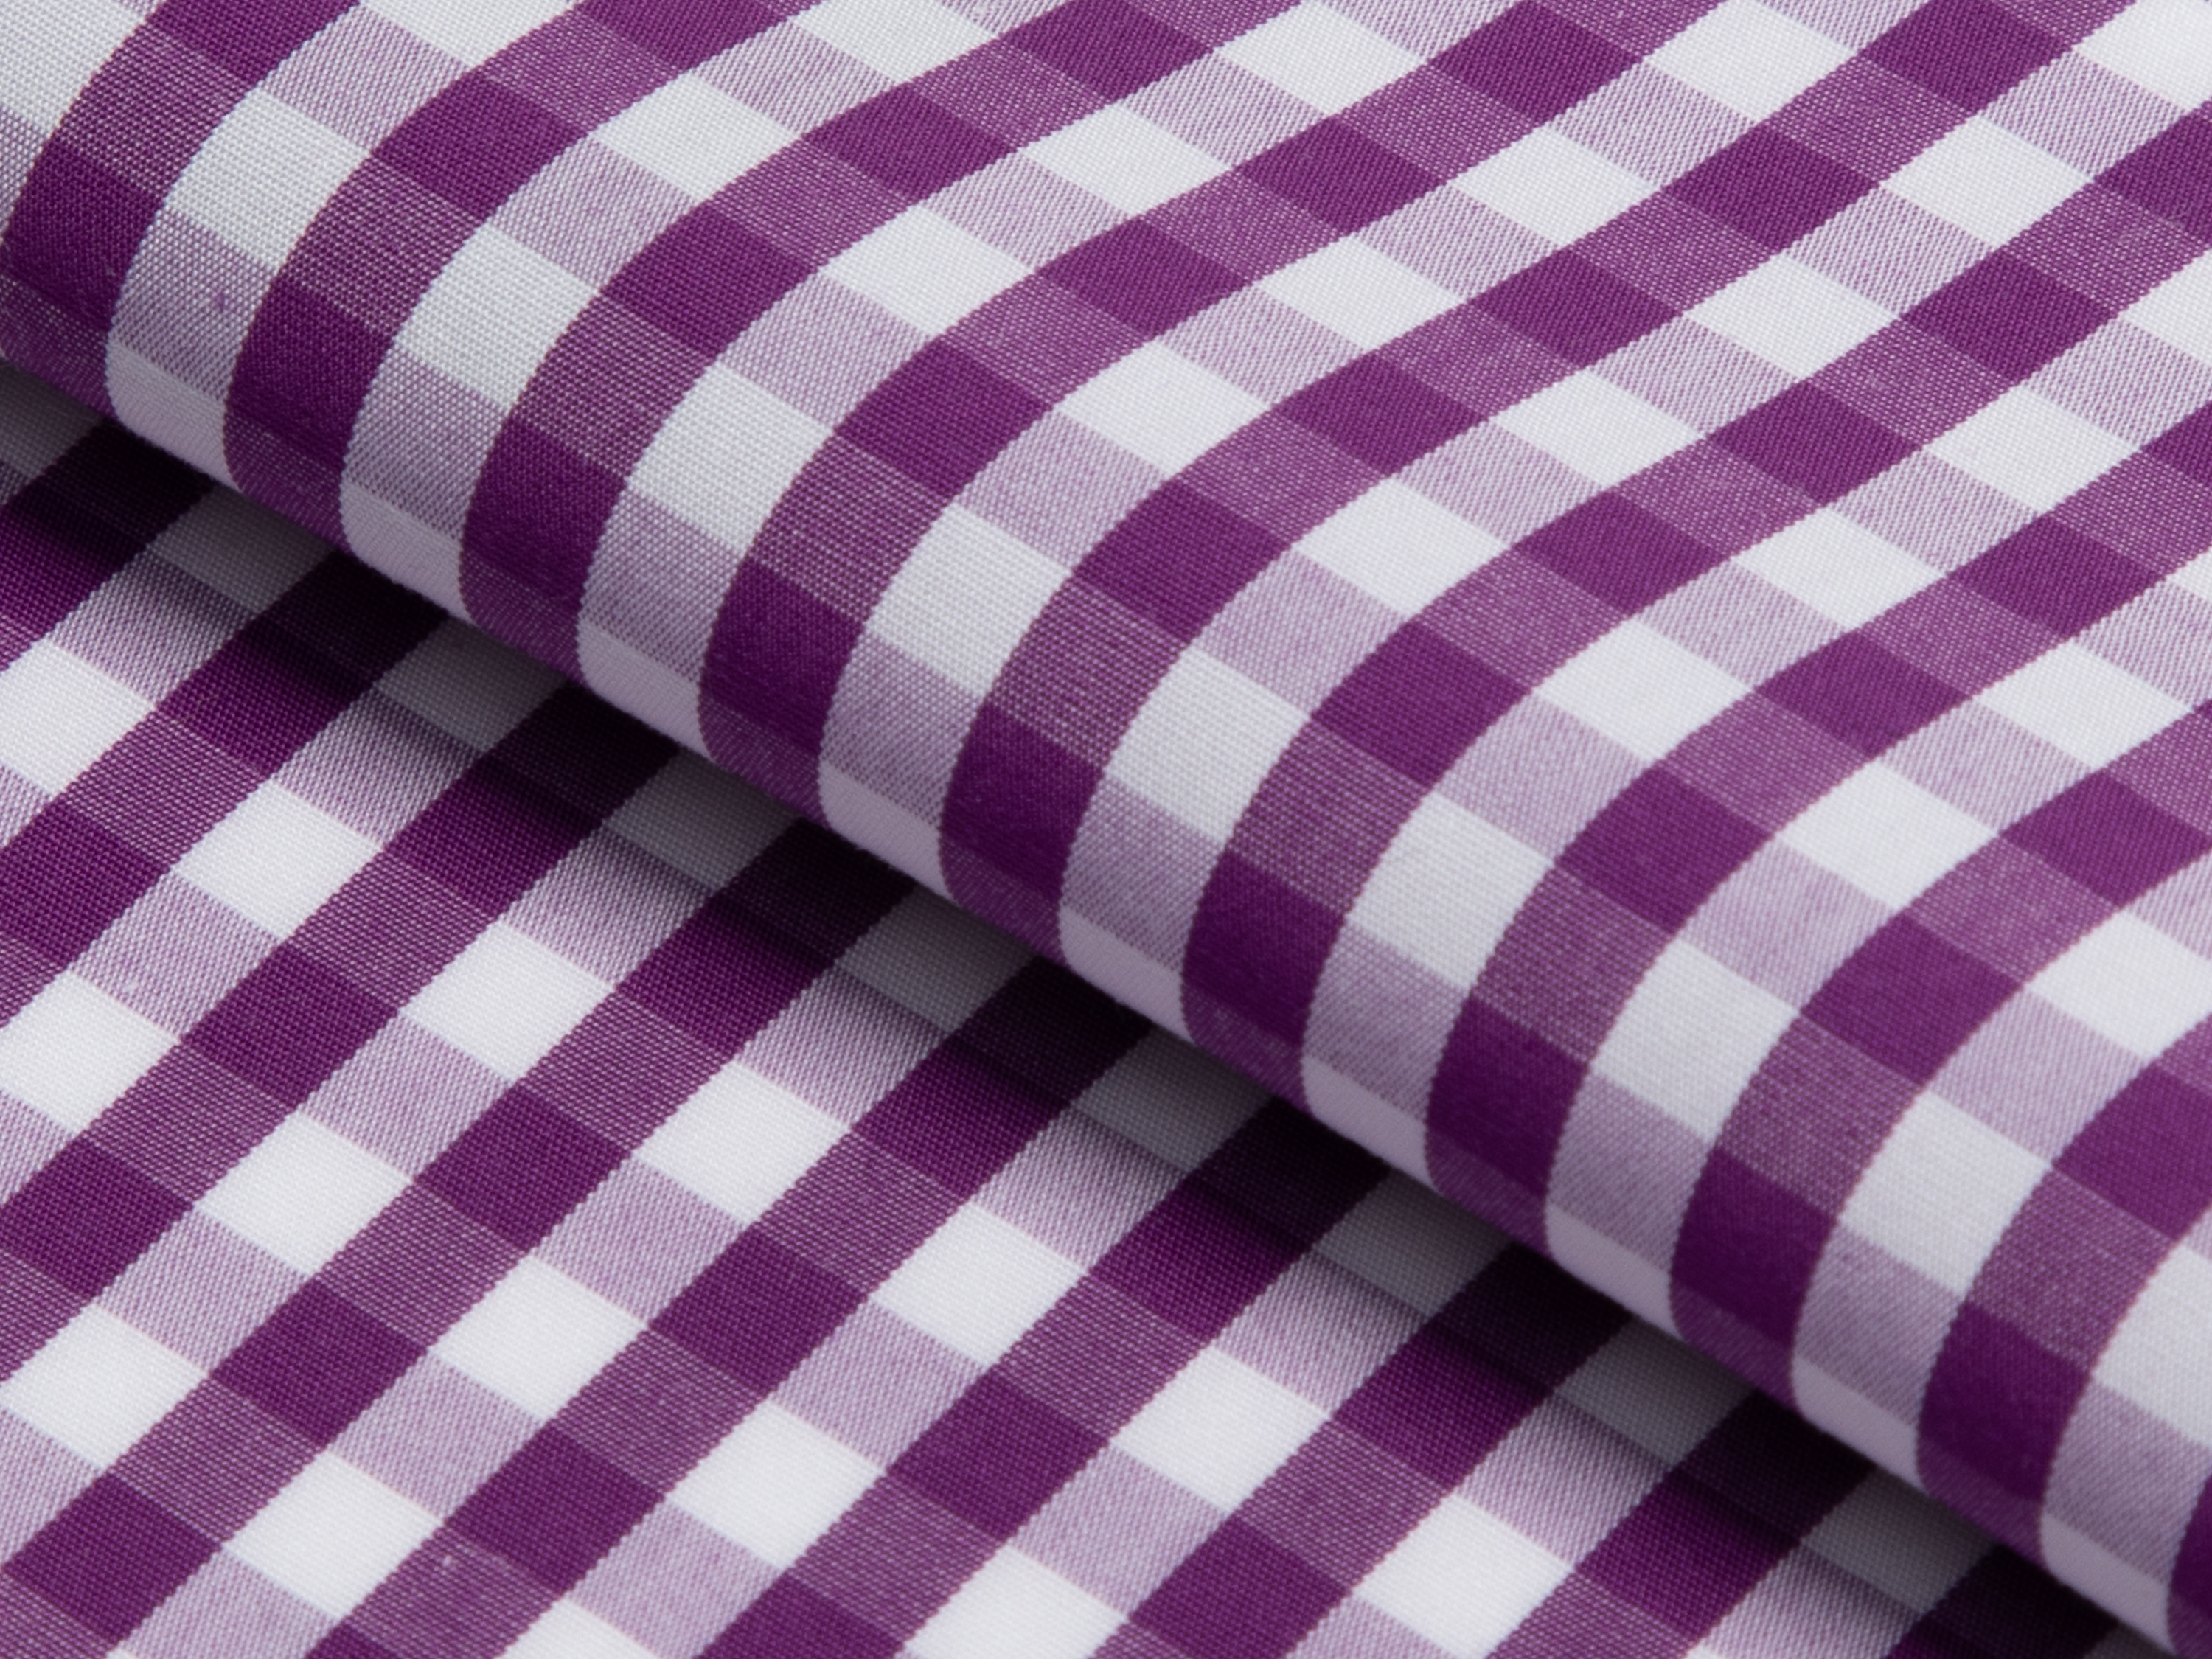 Buy tailor made shirts online - GINGHAM LUXURY  - Gingham Purple